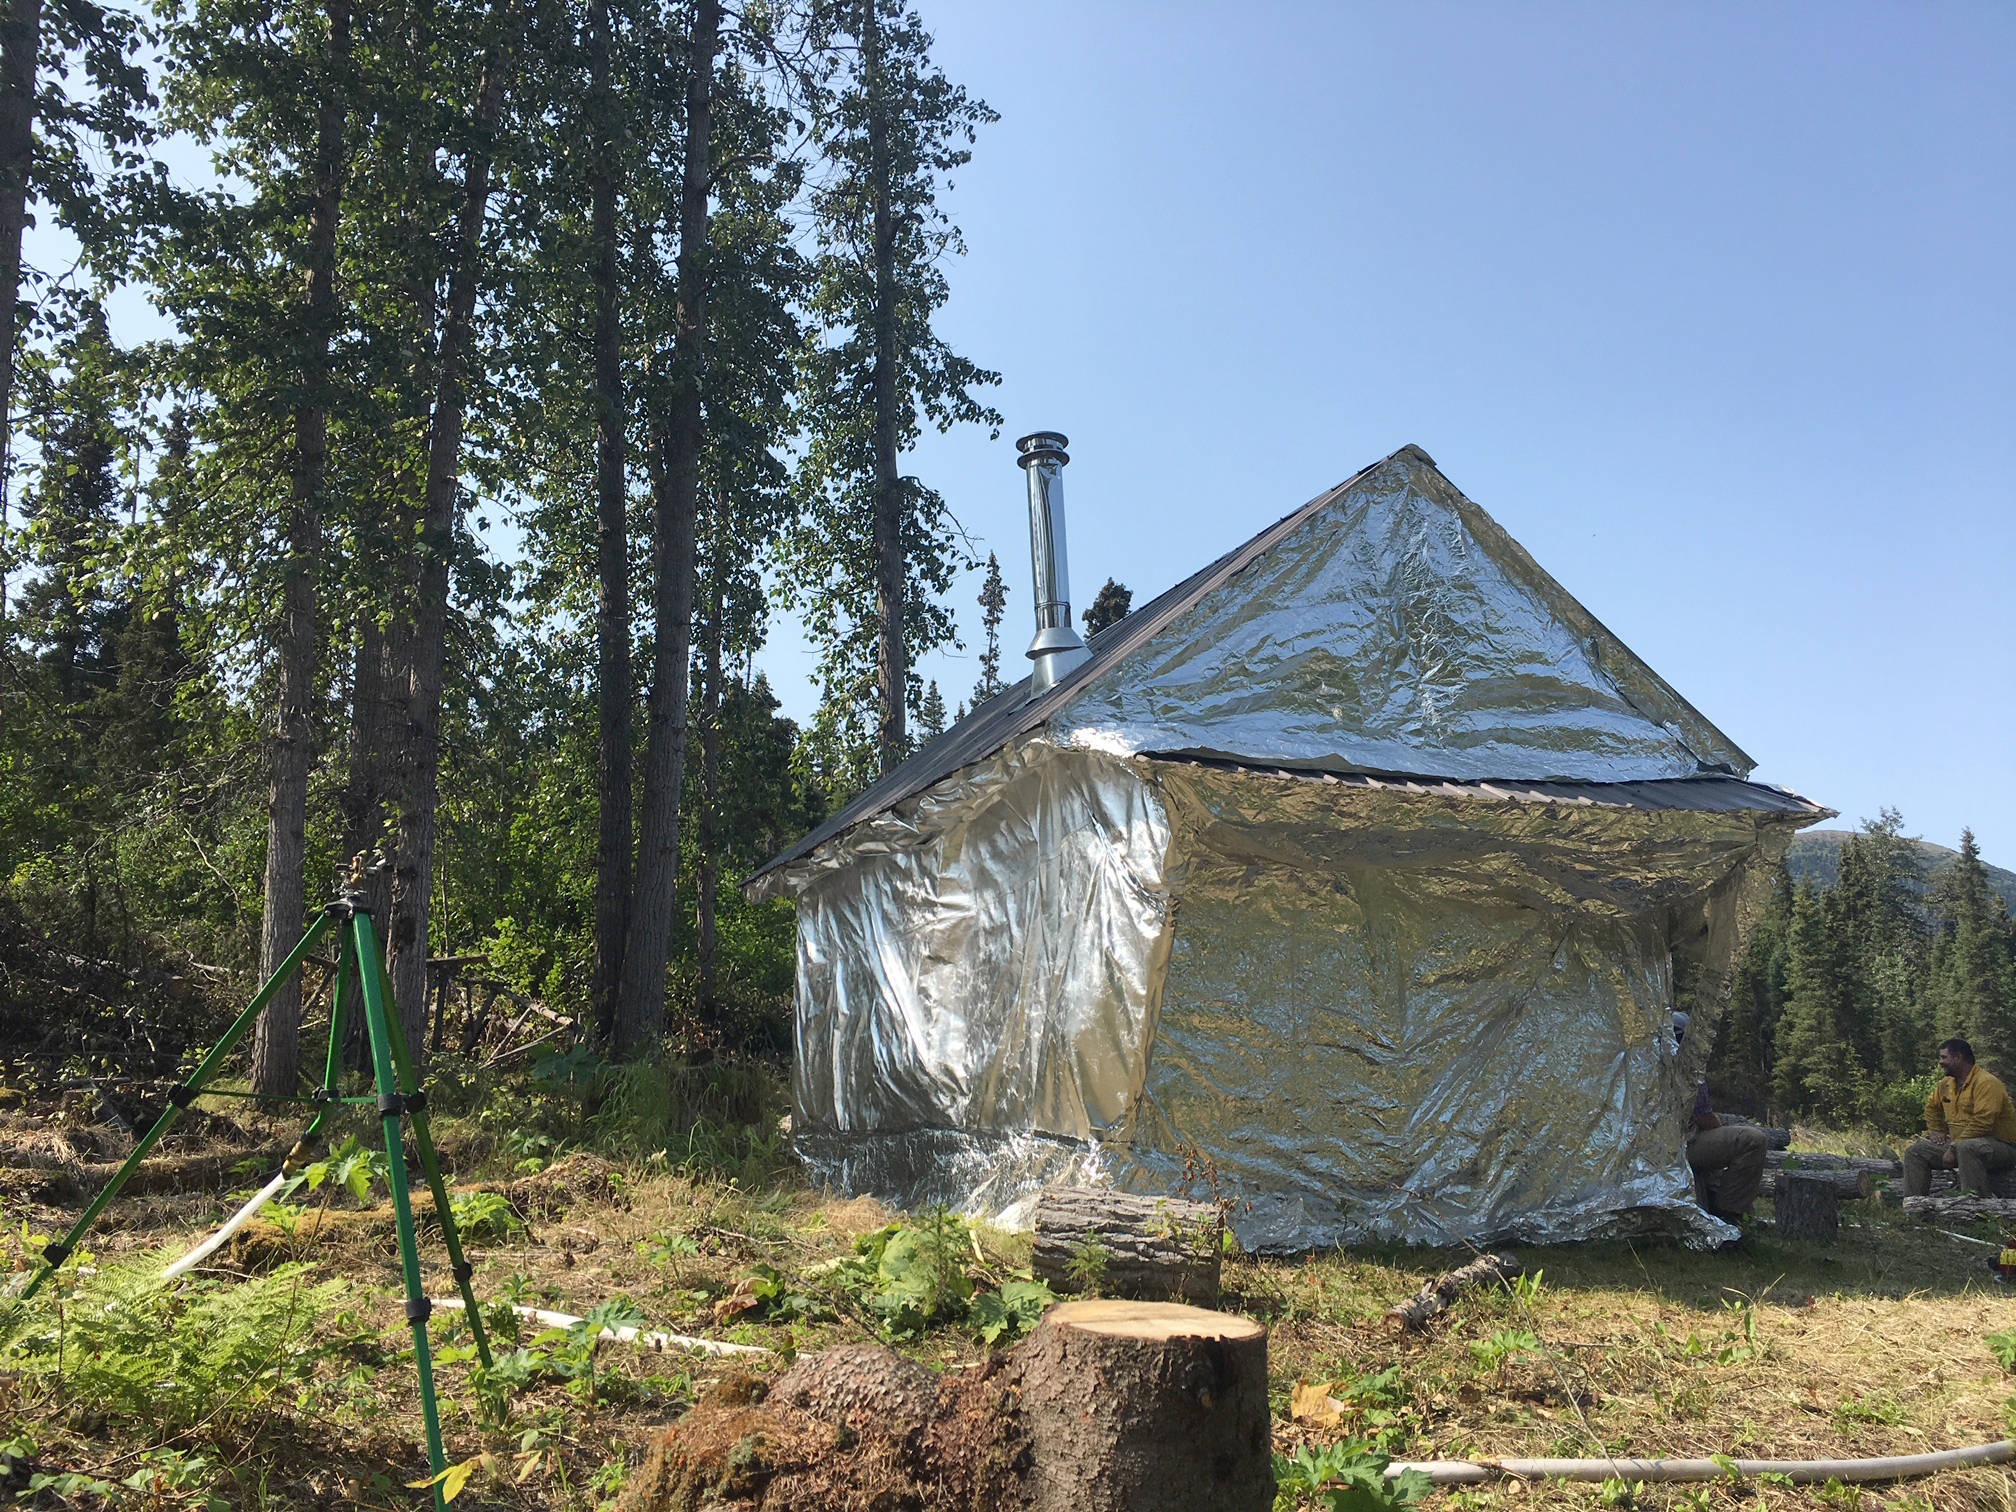 The Harry Johnson Trapline cabin was wrapped in a protective foil that is similar to the shelters wildland firefighters carry. (Photo provided by Kenai National Wildlife Refuge)